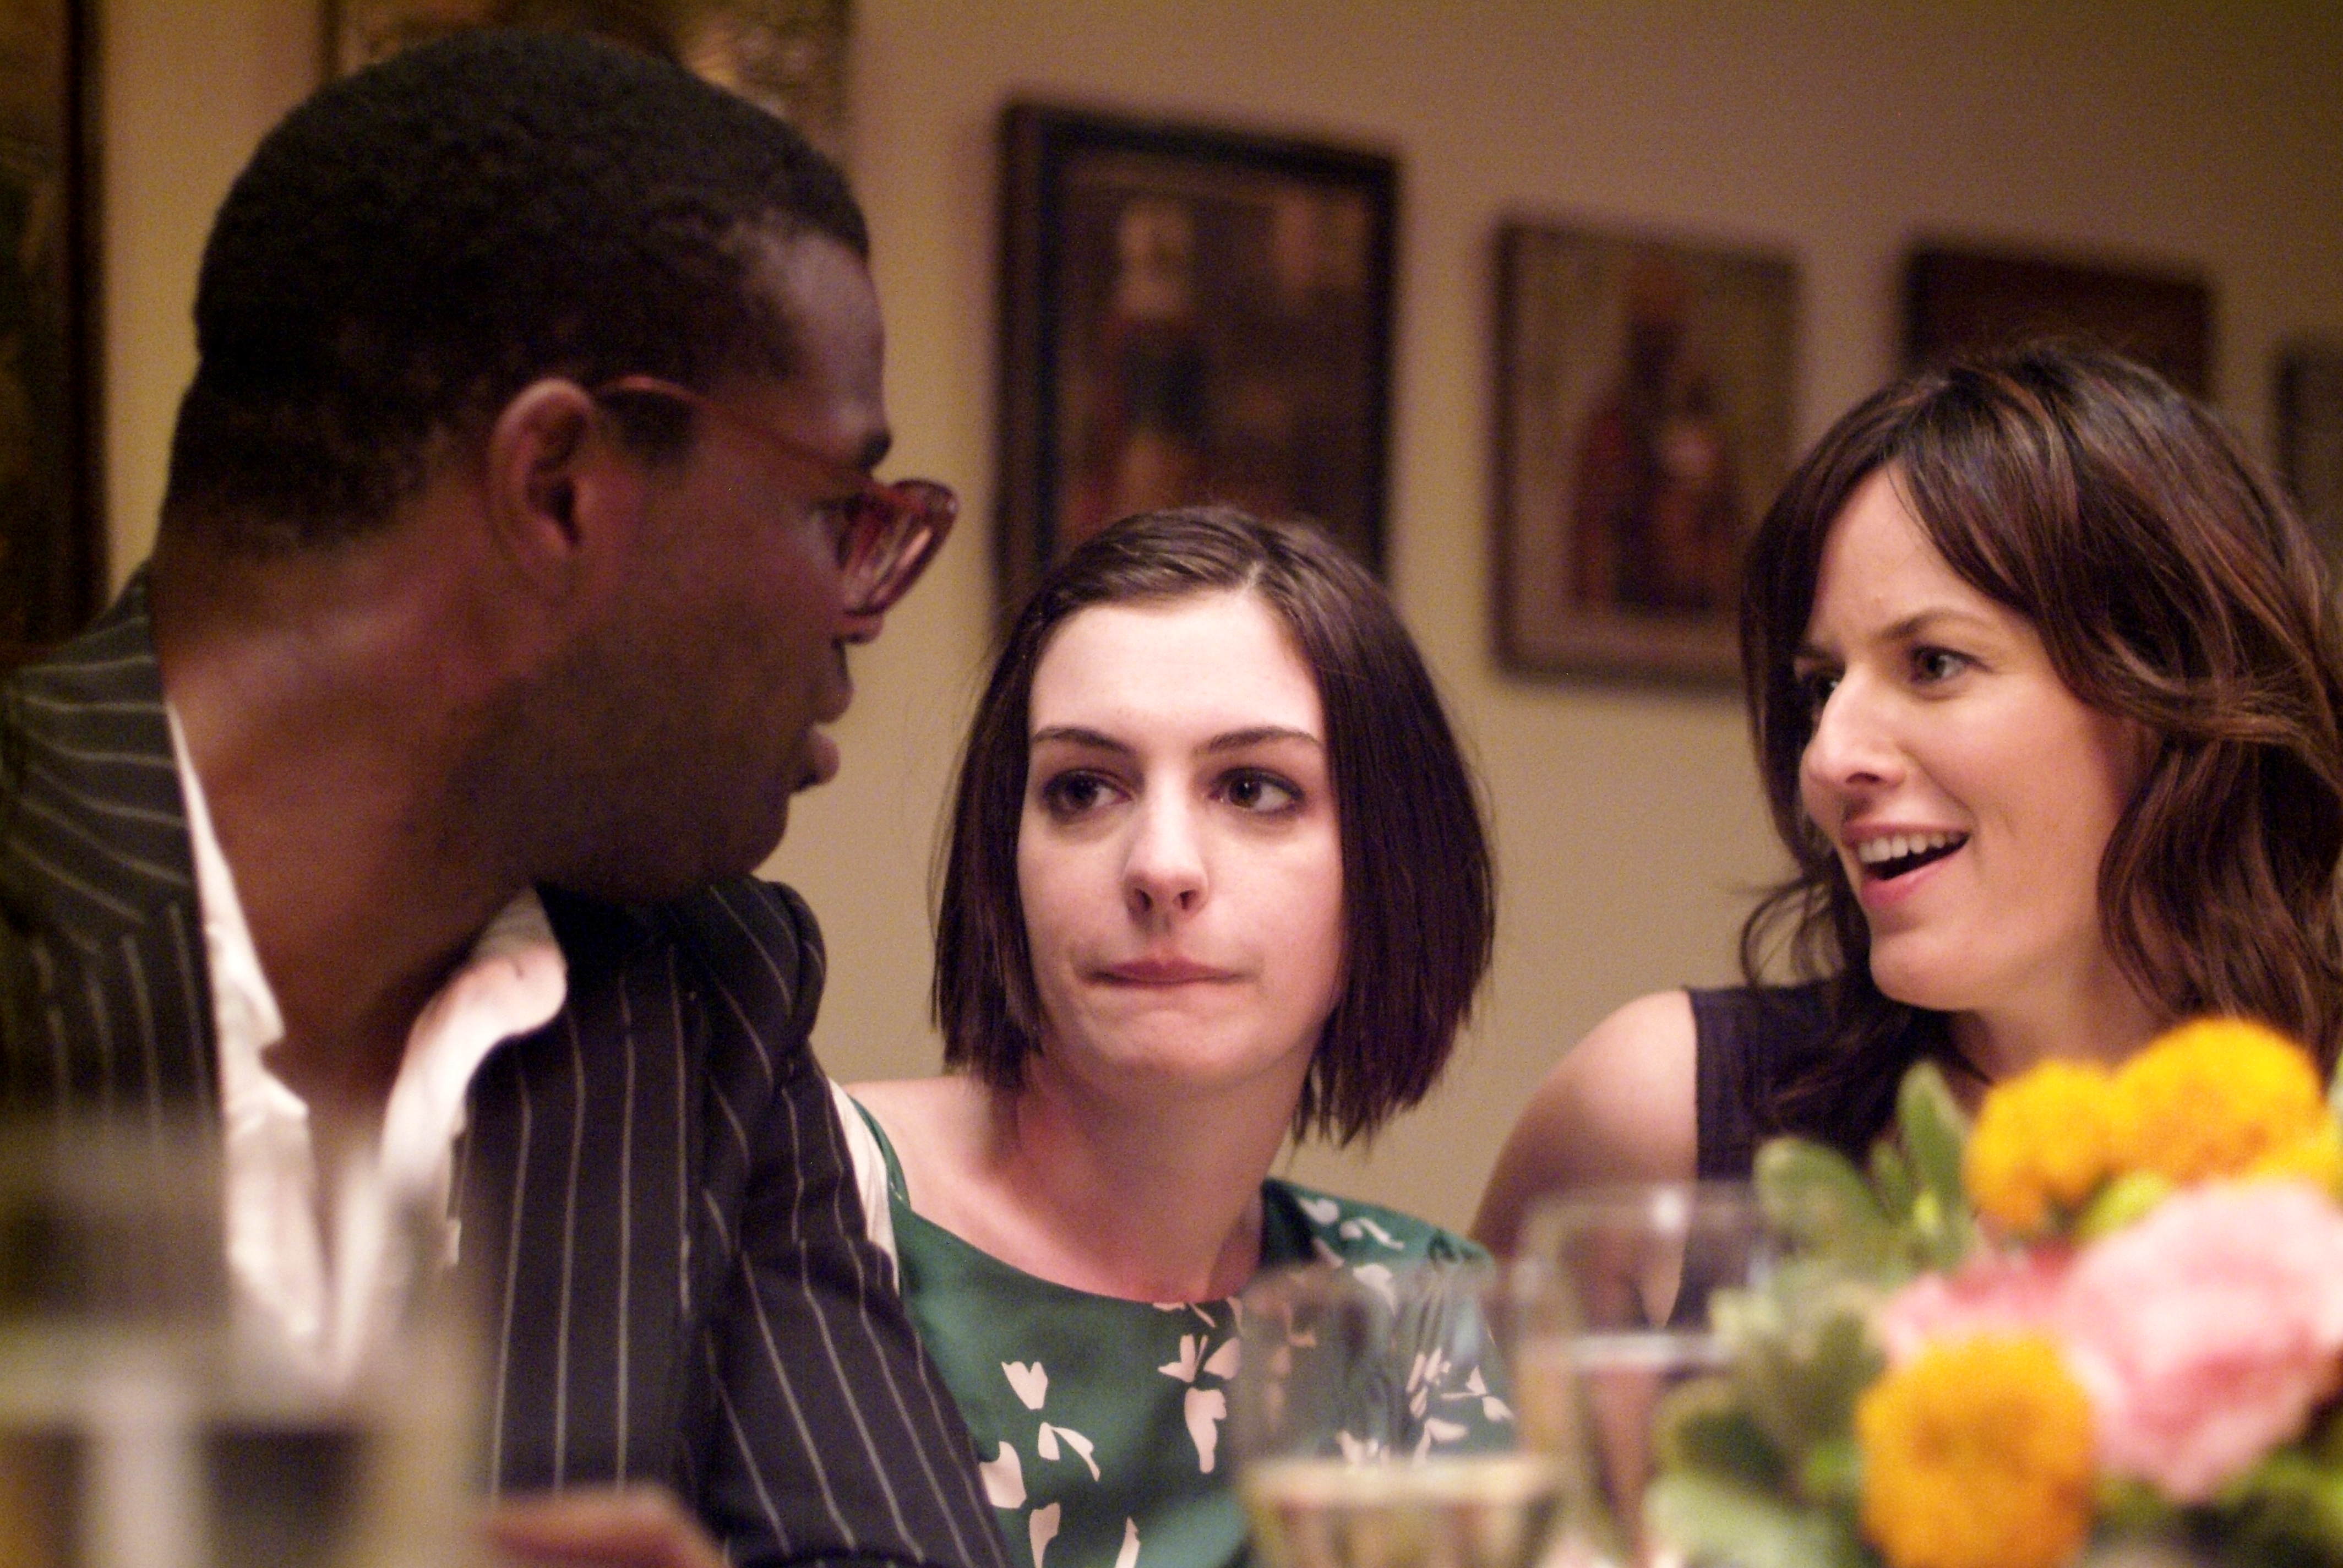 Tunde Adebimpe, Anne Hathaway and Rosemarie DeWitt in Sony Pictures Classics' Rachel Getting Married (2008). Photo by Bob Vergara.